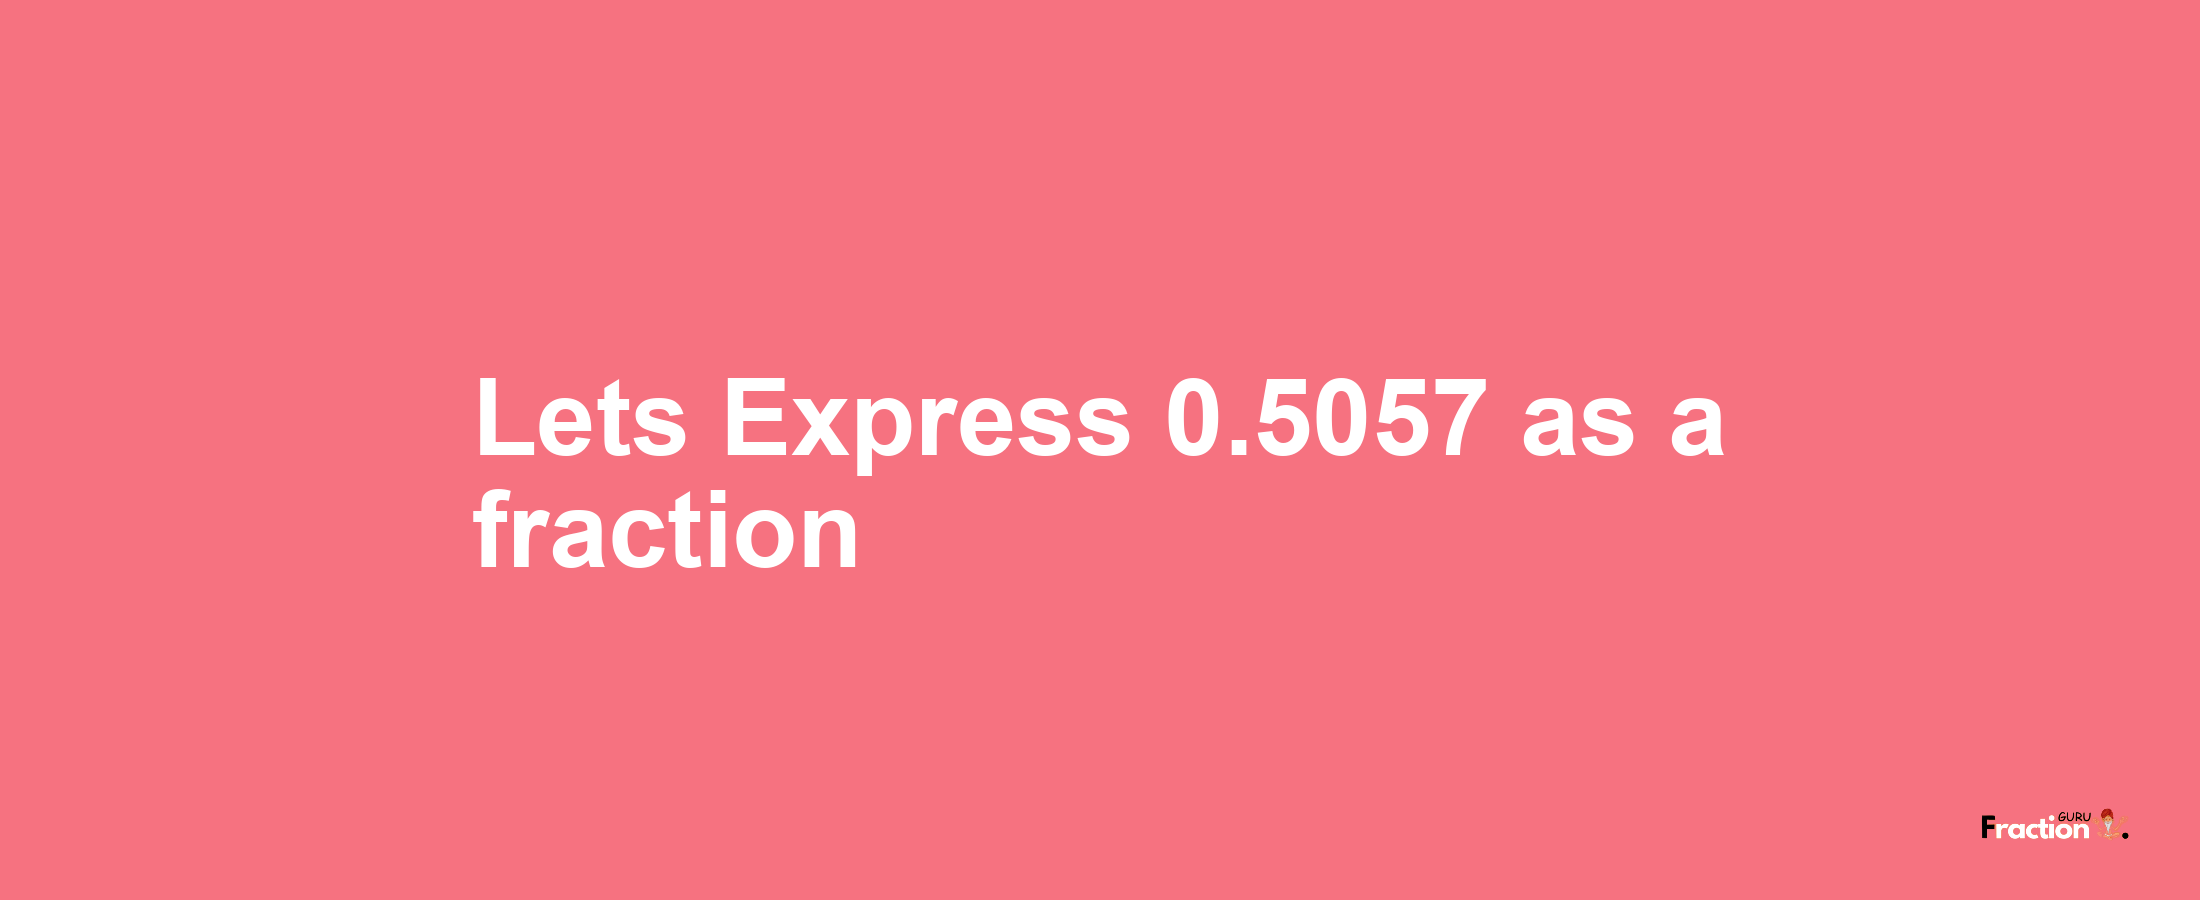 Lets Express 0.5057 as afraction